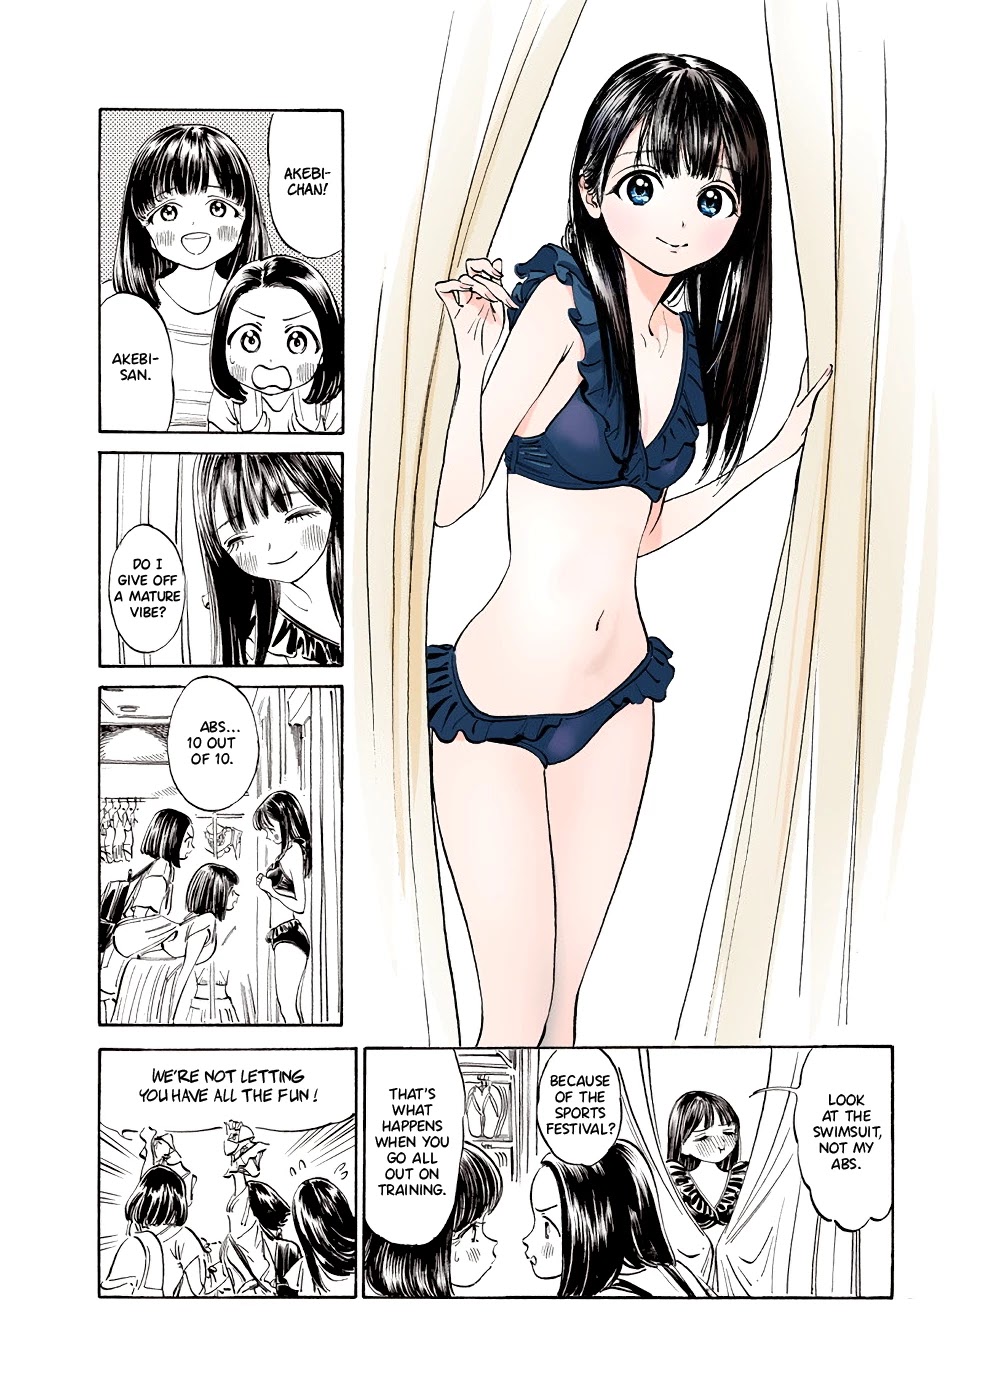 Akebi-Chan No Sailor Fuku Chapter 24: Do I Give Off A Mature Vibe? - Picture 2